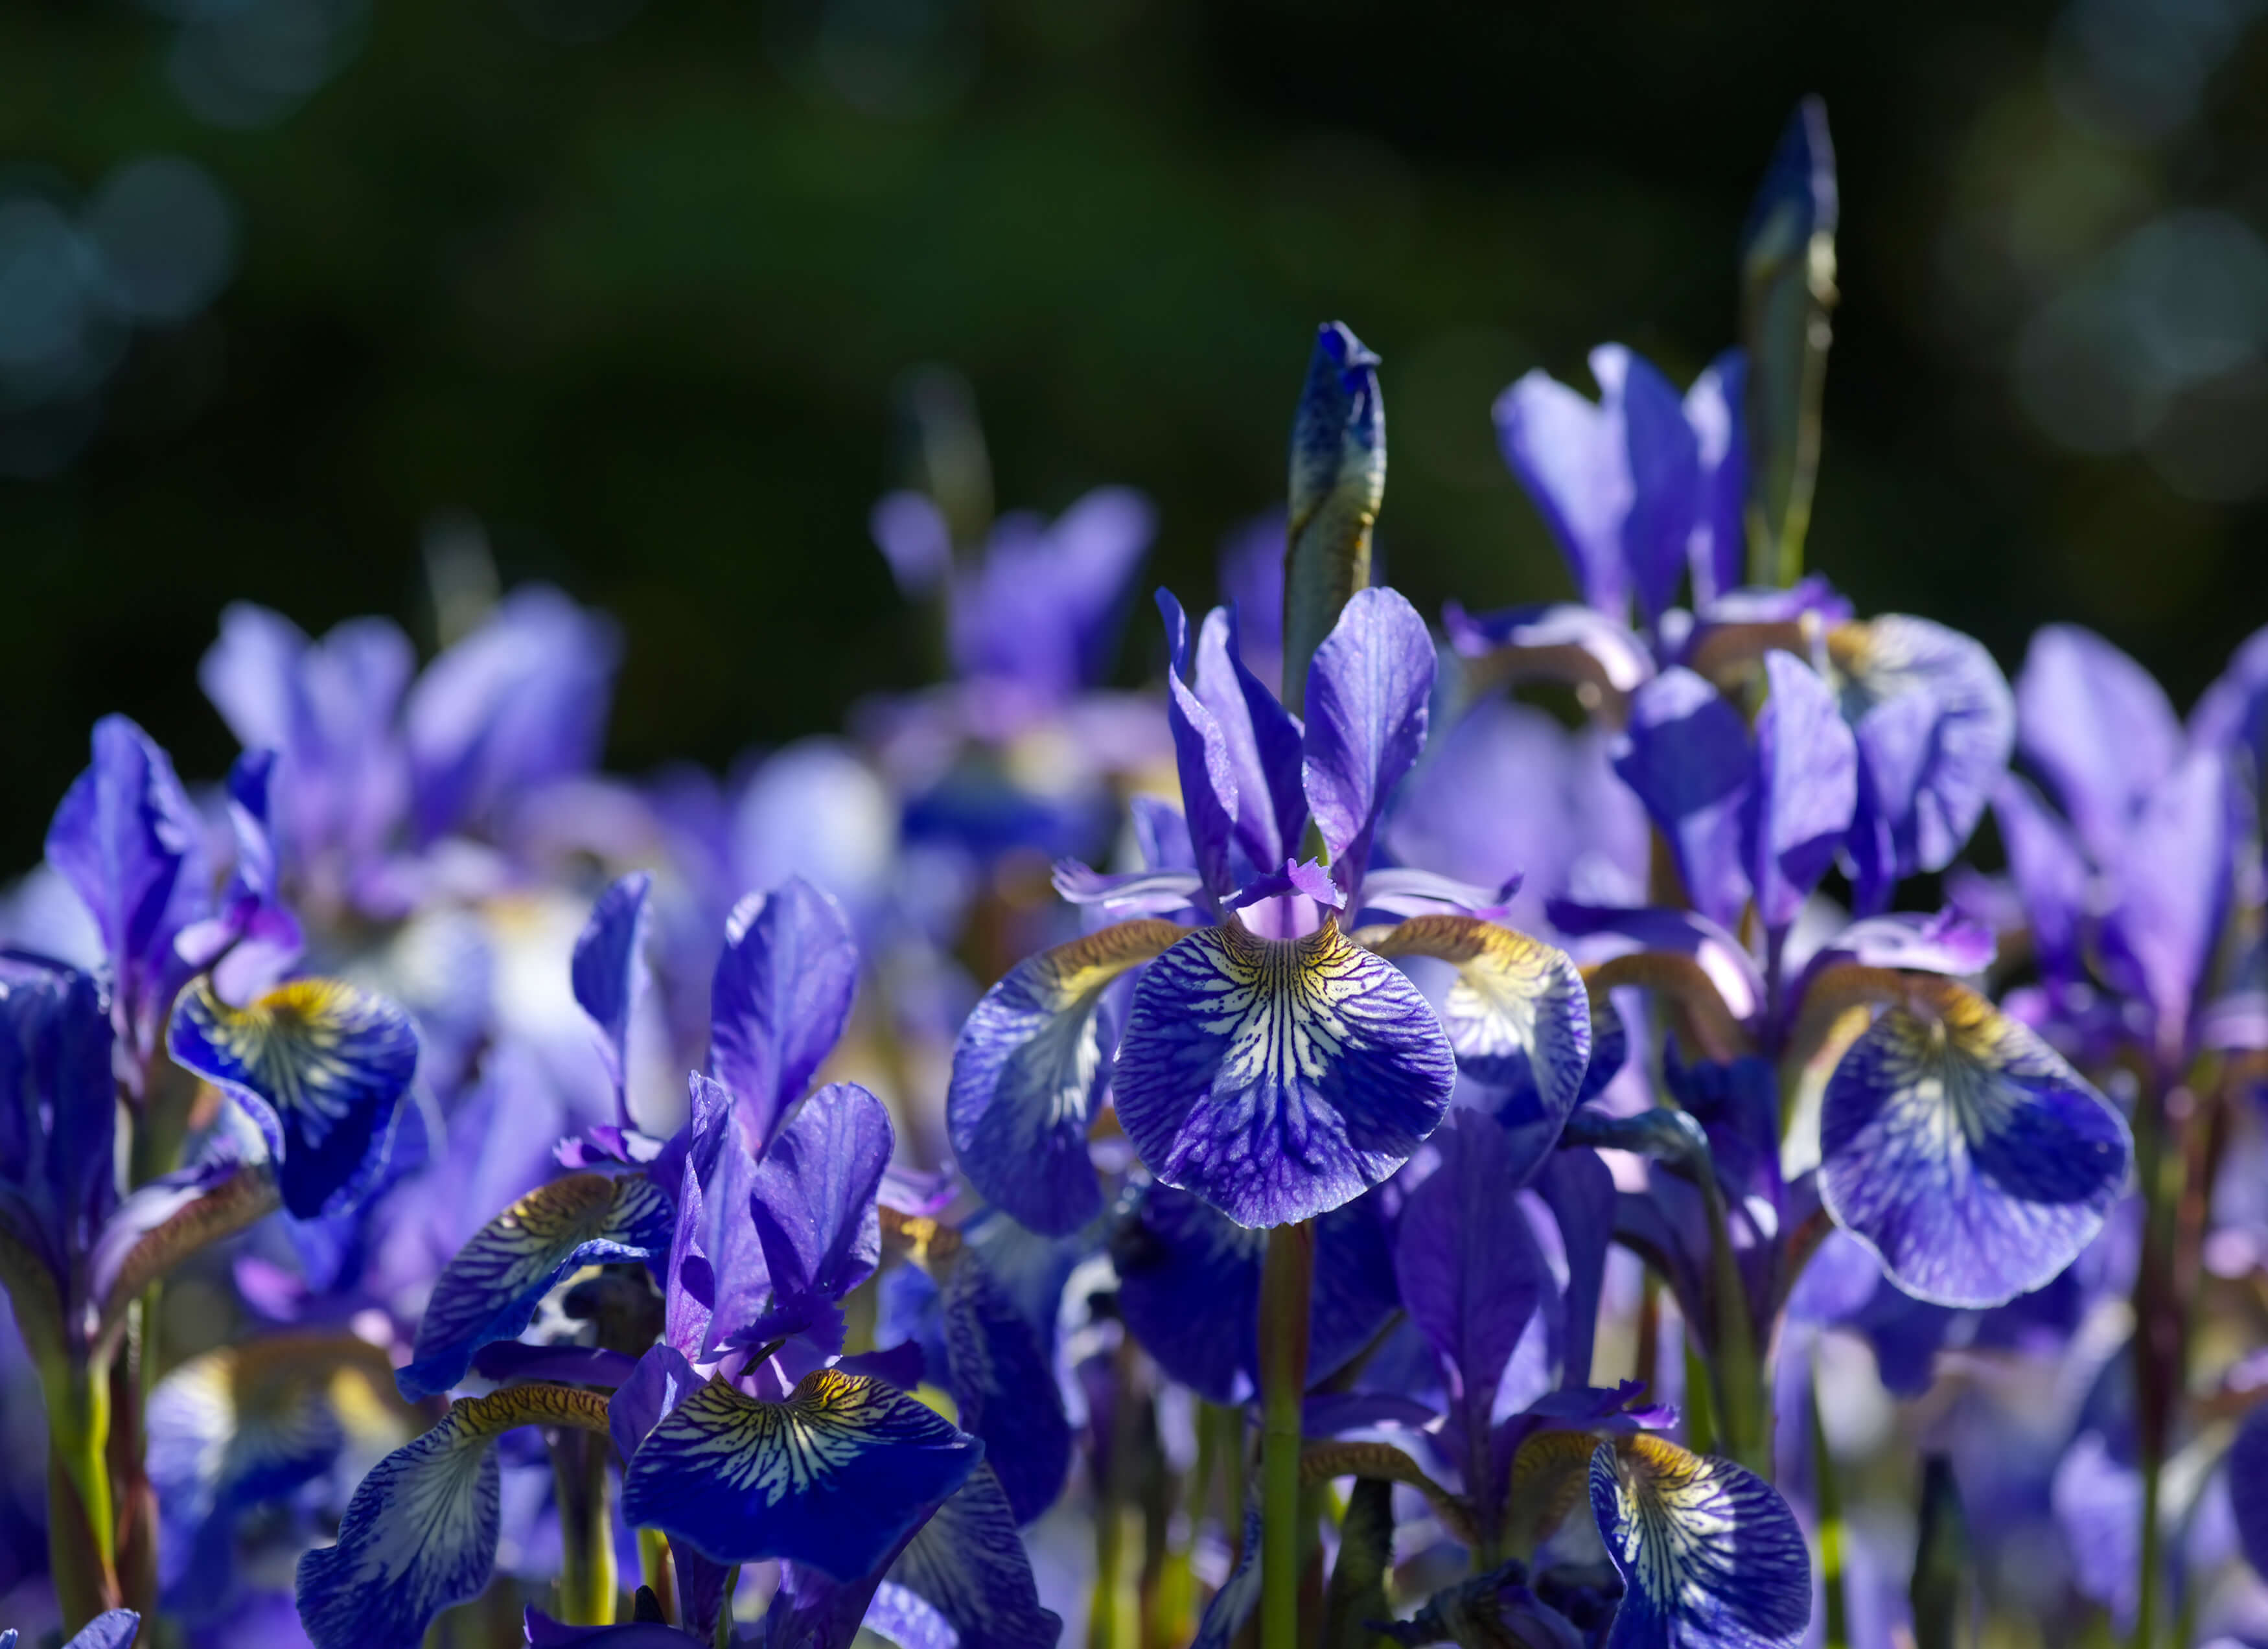 Stretch the season of your favorite flowers, like irises, by planting cultivars with different bloom times.